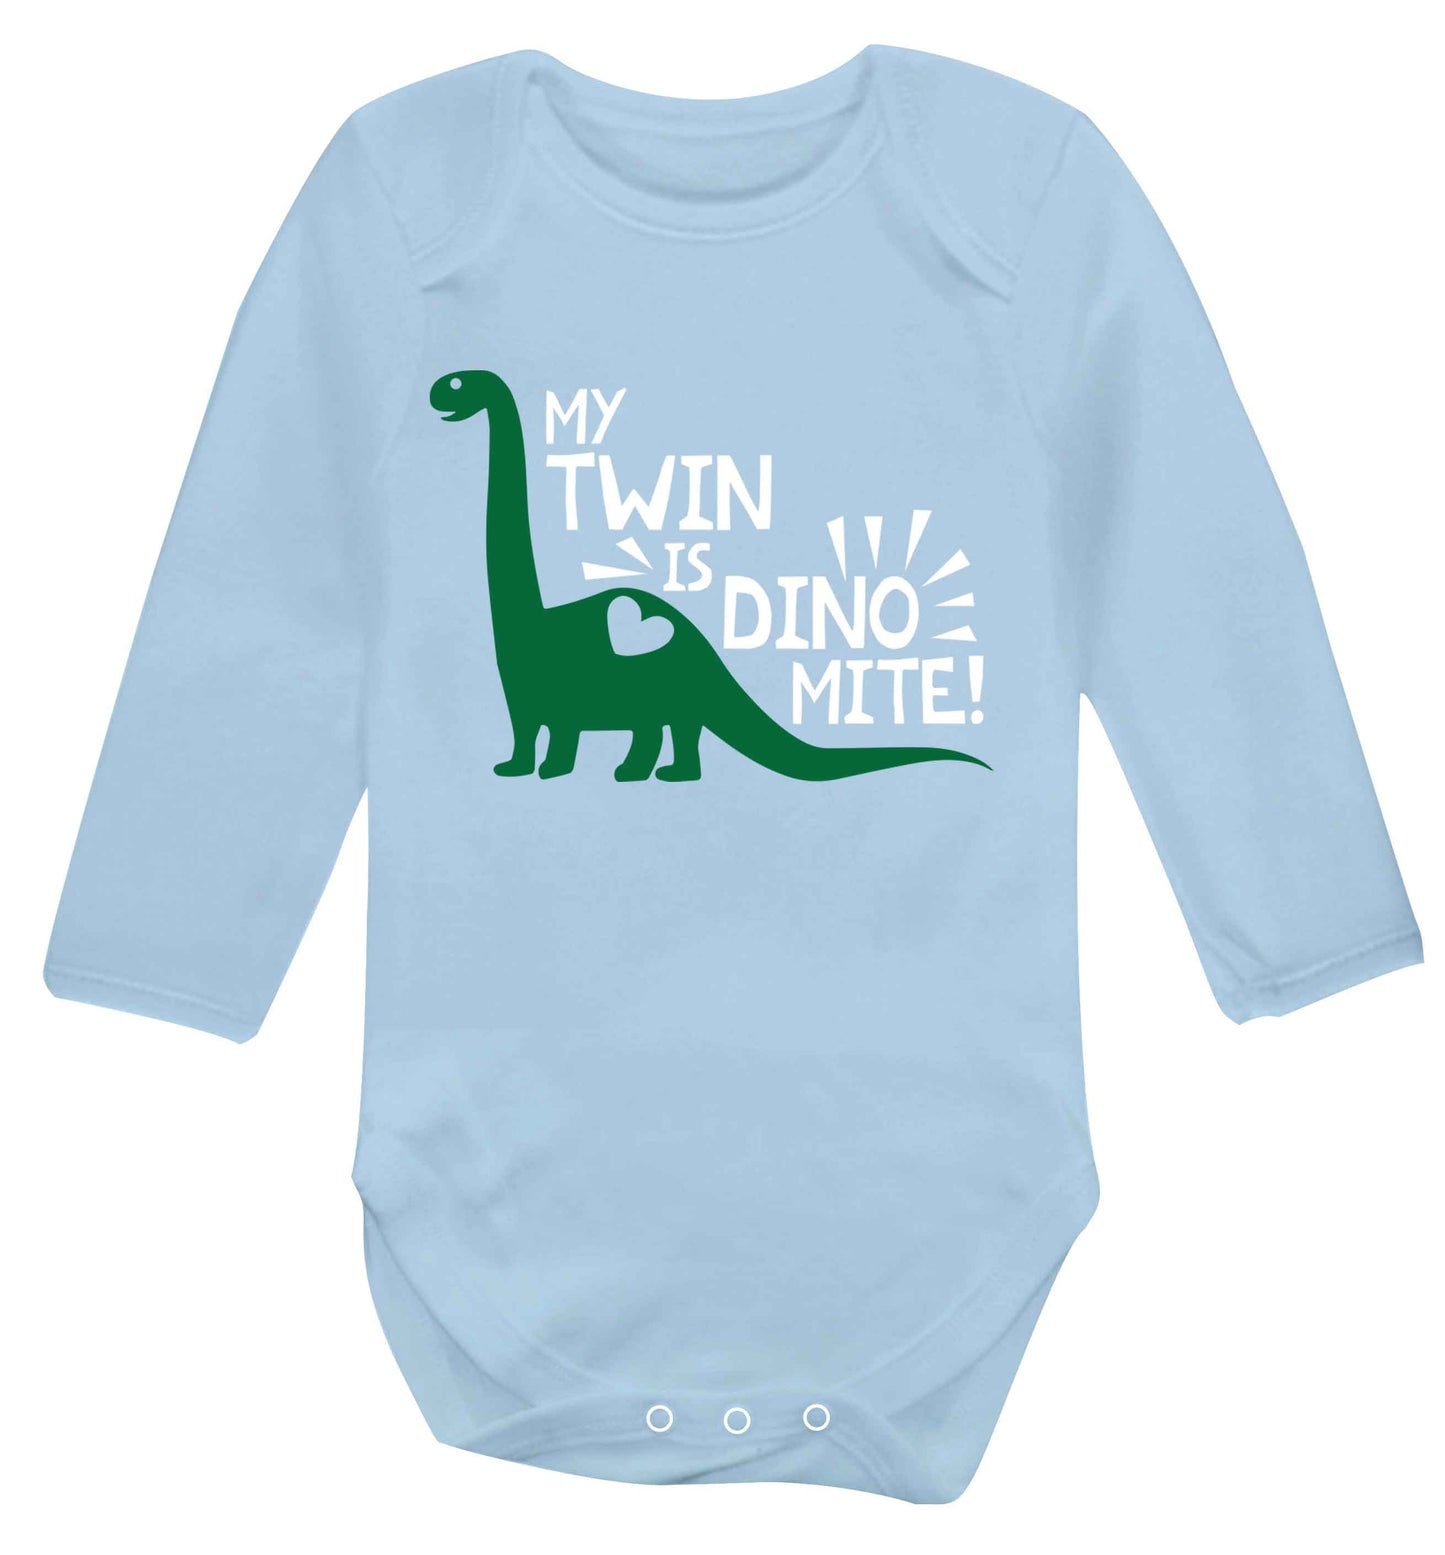 My twin is dinomite! Baby Vest long sleeved pale blue 6-12 months